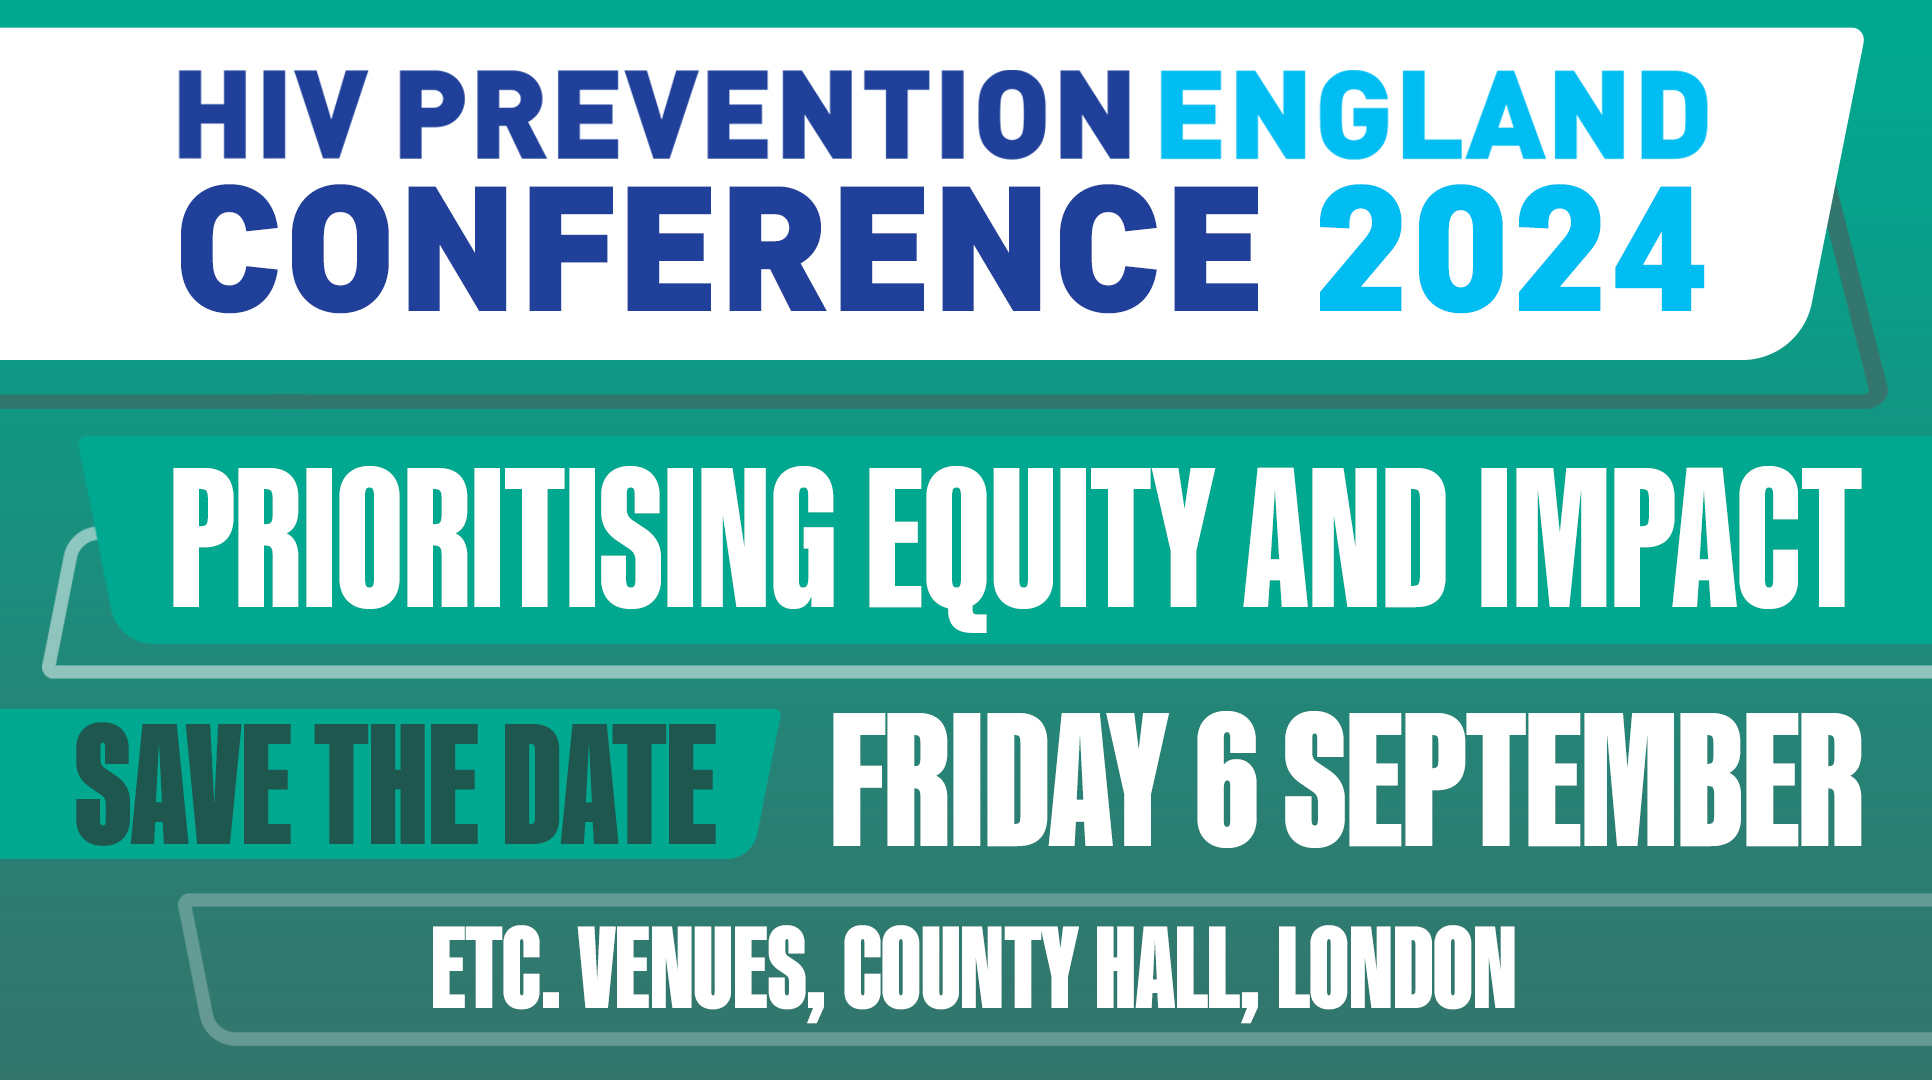 HIV Prevention England conference 2024 banner with date (Friday 6 September) and venue (Etc venue, County Hall, London)